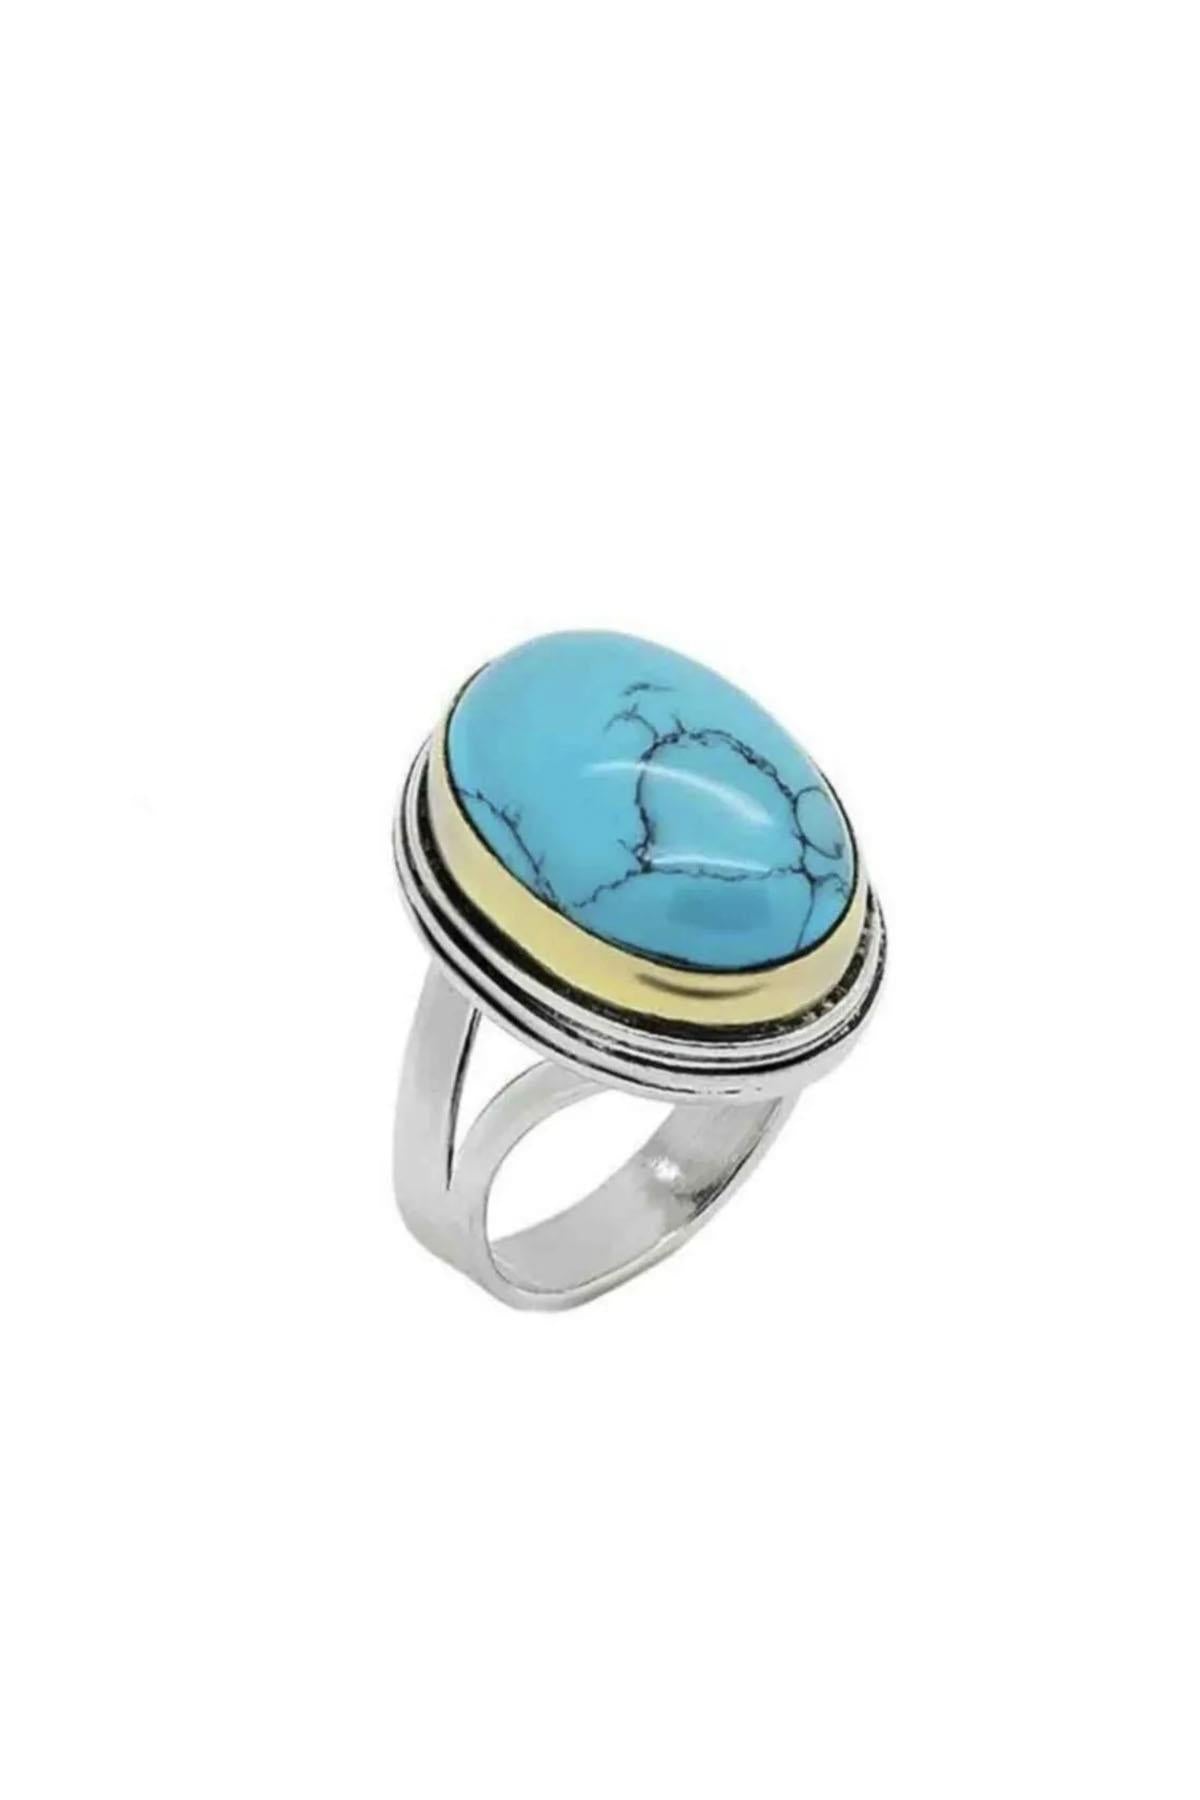 Sarma Series Blue Veined Turquoise Turquoise Stone Handcrafted Women's  Authentic Silver Ring Adjustable Size